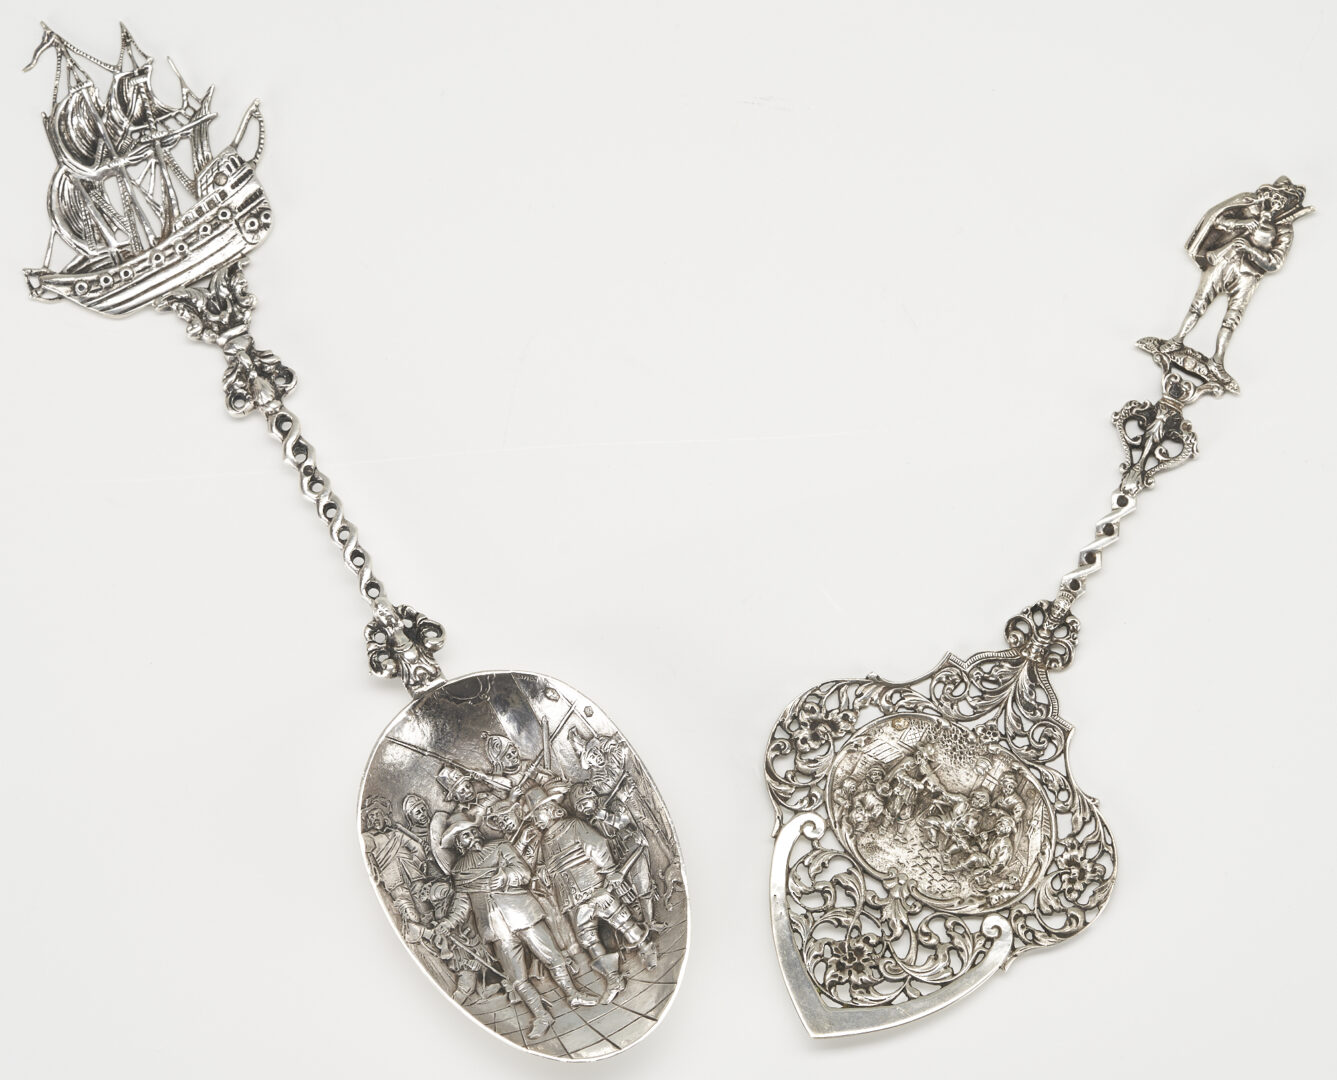 Lot 920: 4 Continental Repousse Silver Items .800+, incl. Hollowware & 2 Serving Spoons